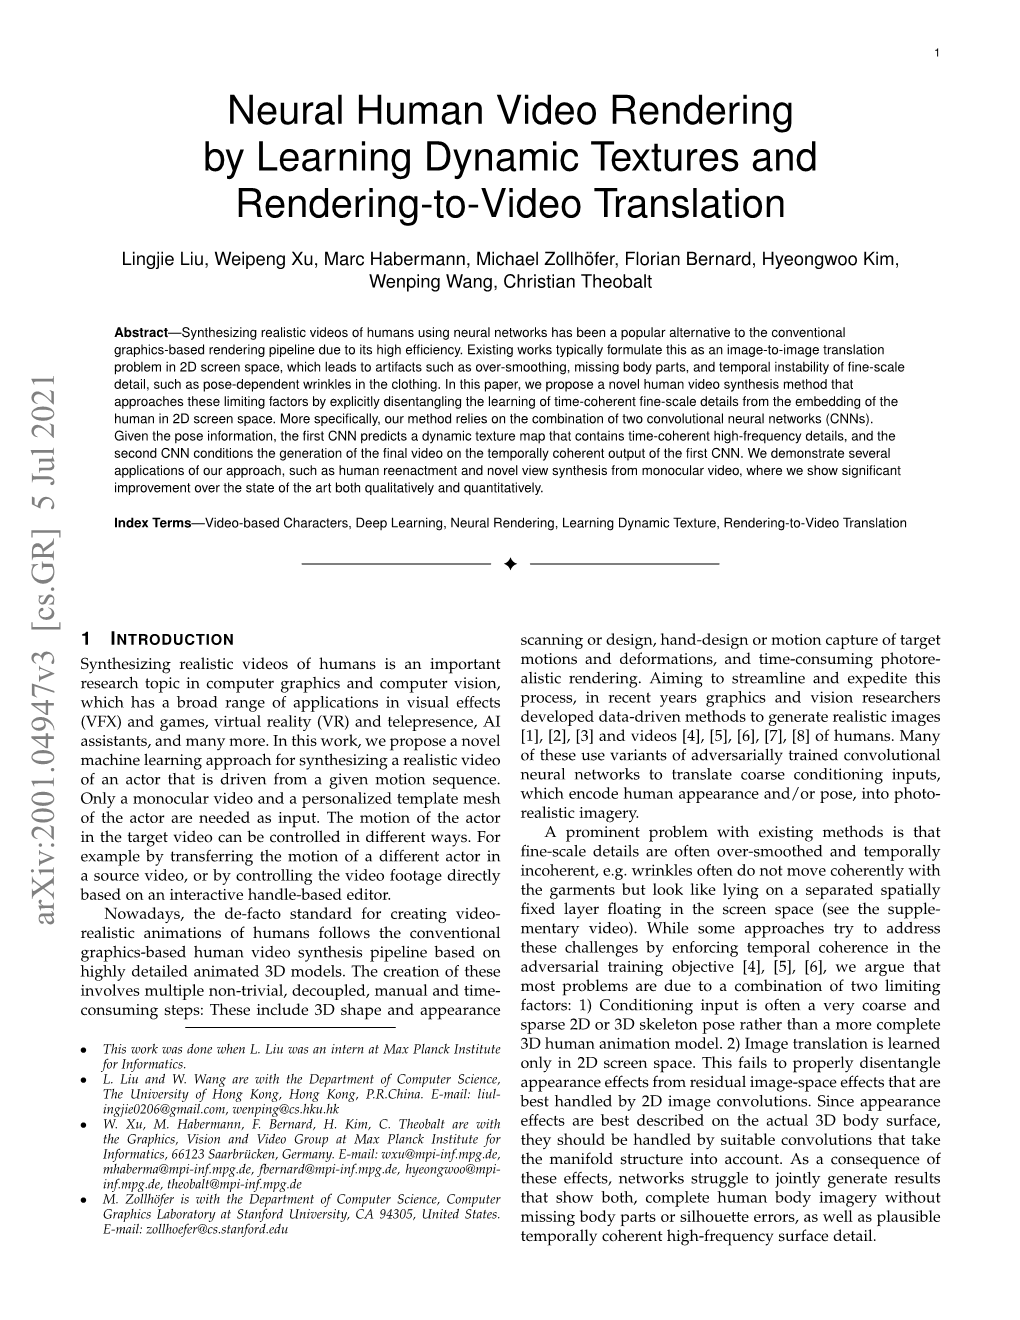 Neural Human Video Rendering by Learning Dynamic Textures and Rendering-To-Video Translation